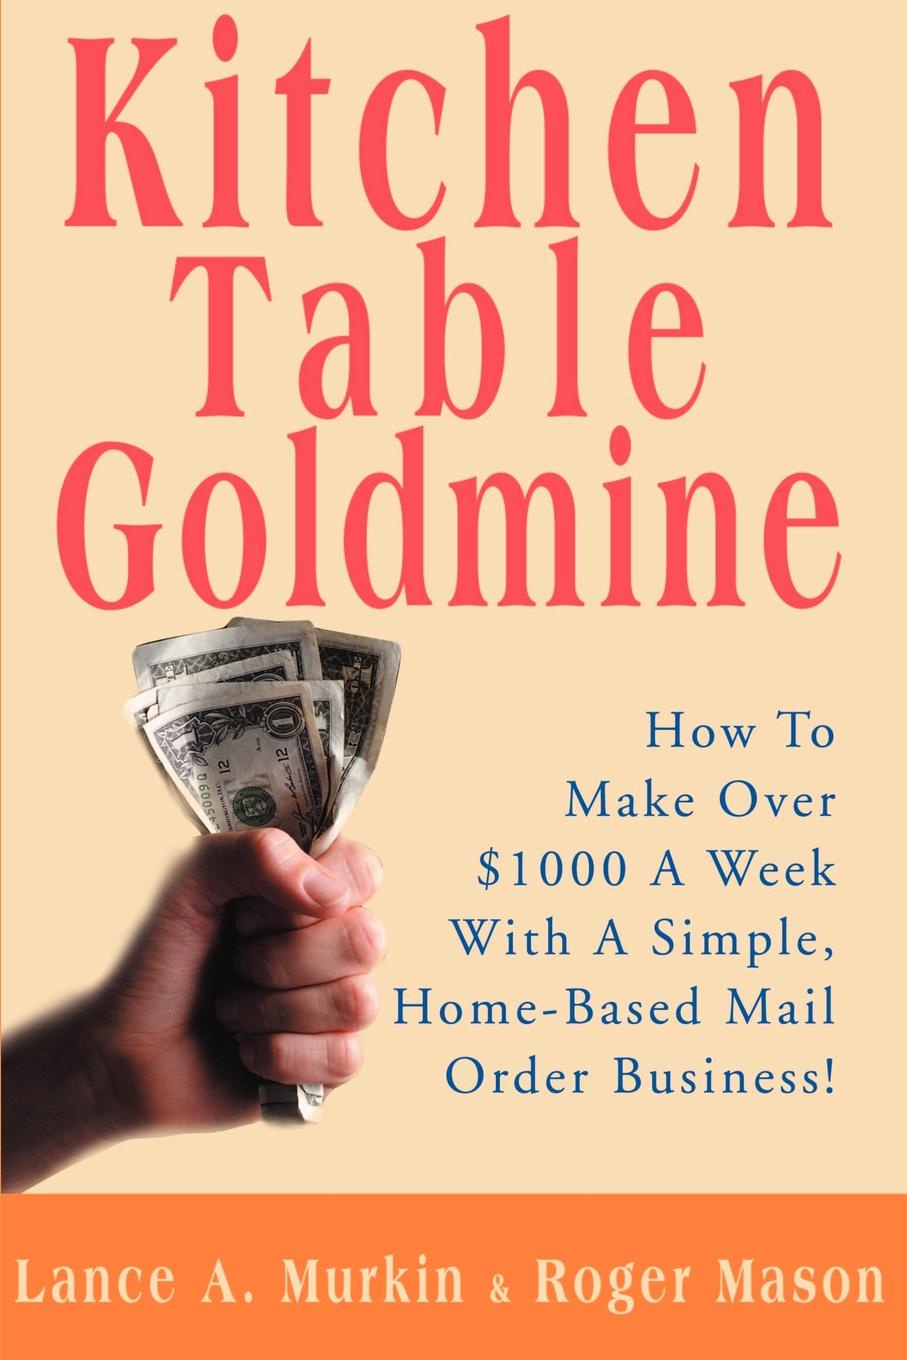 Kitchen Table Goldmine. How to Make Over .1000 a Week with a Simple, Home-Based Mail Order Business!